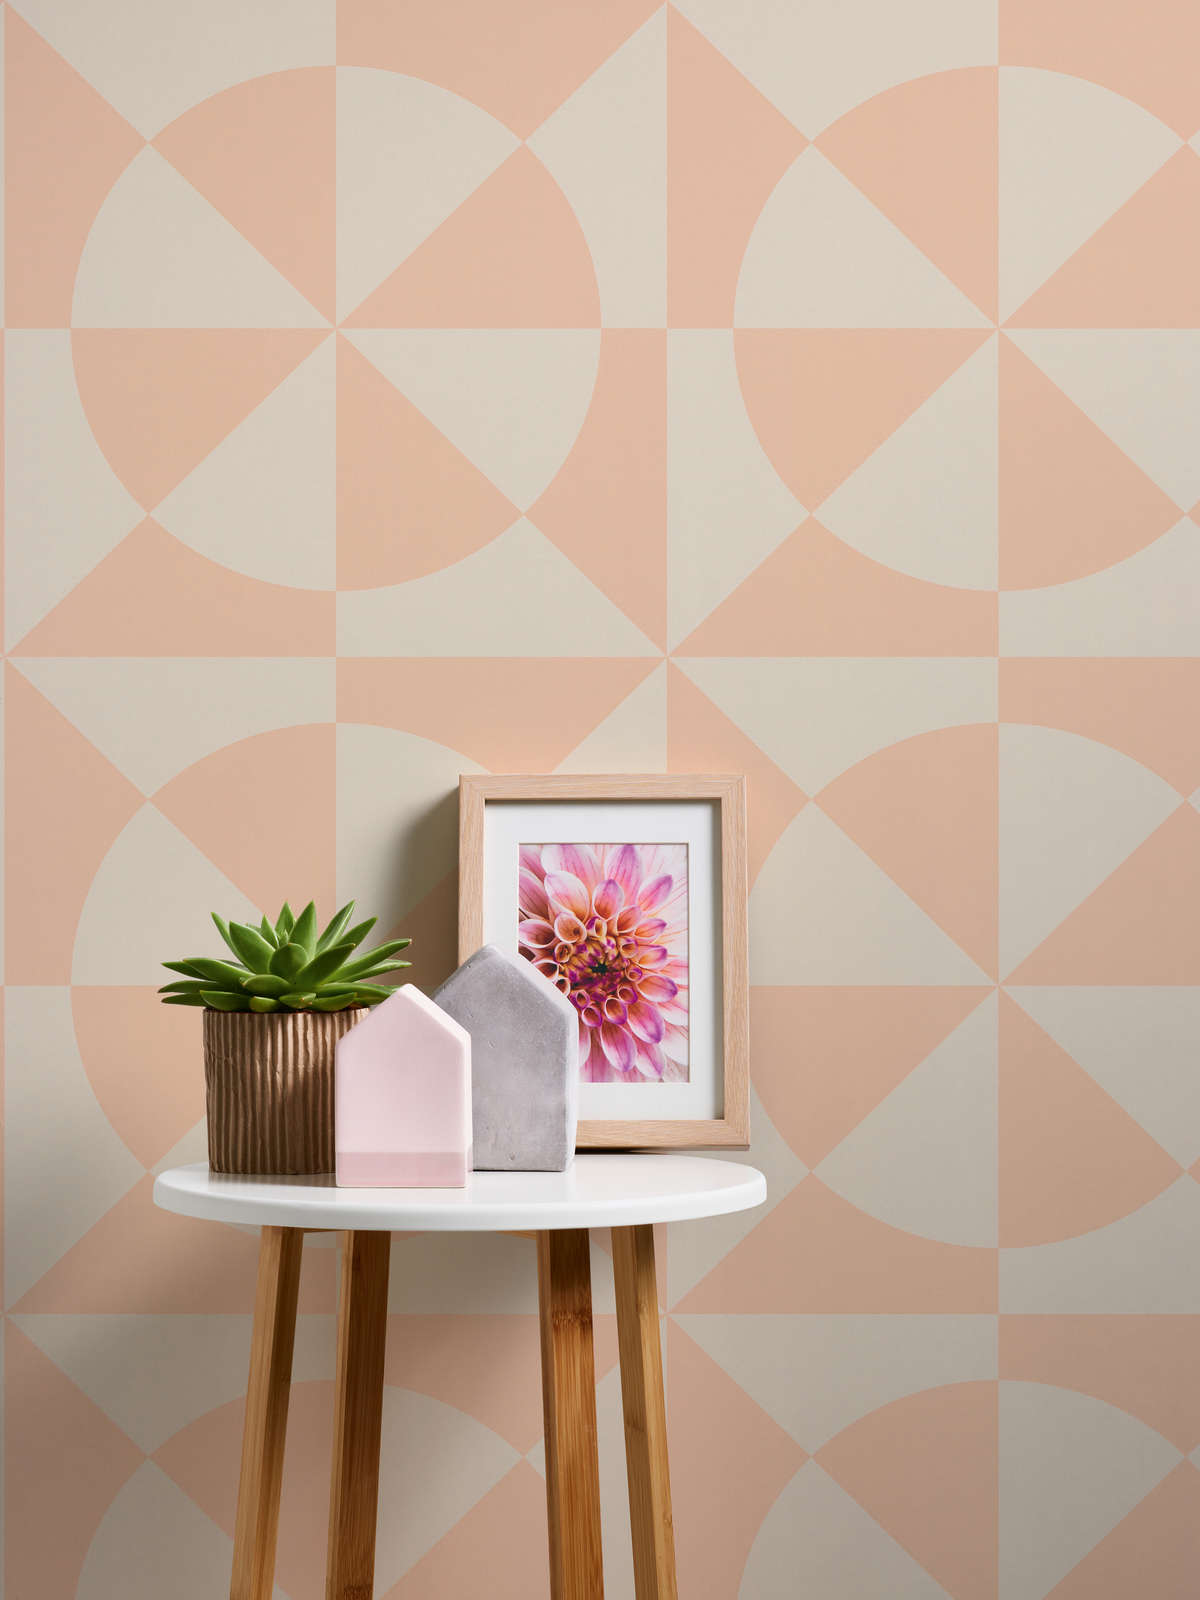             Graphic non-woven wallpaper with triangles and circles - cream, pink
        